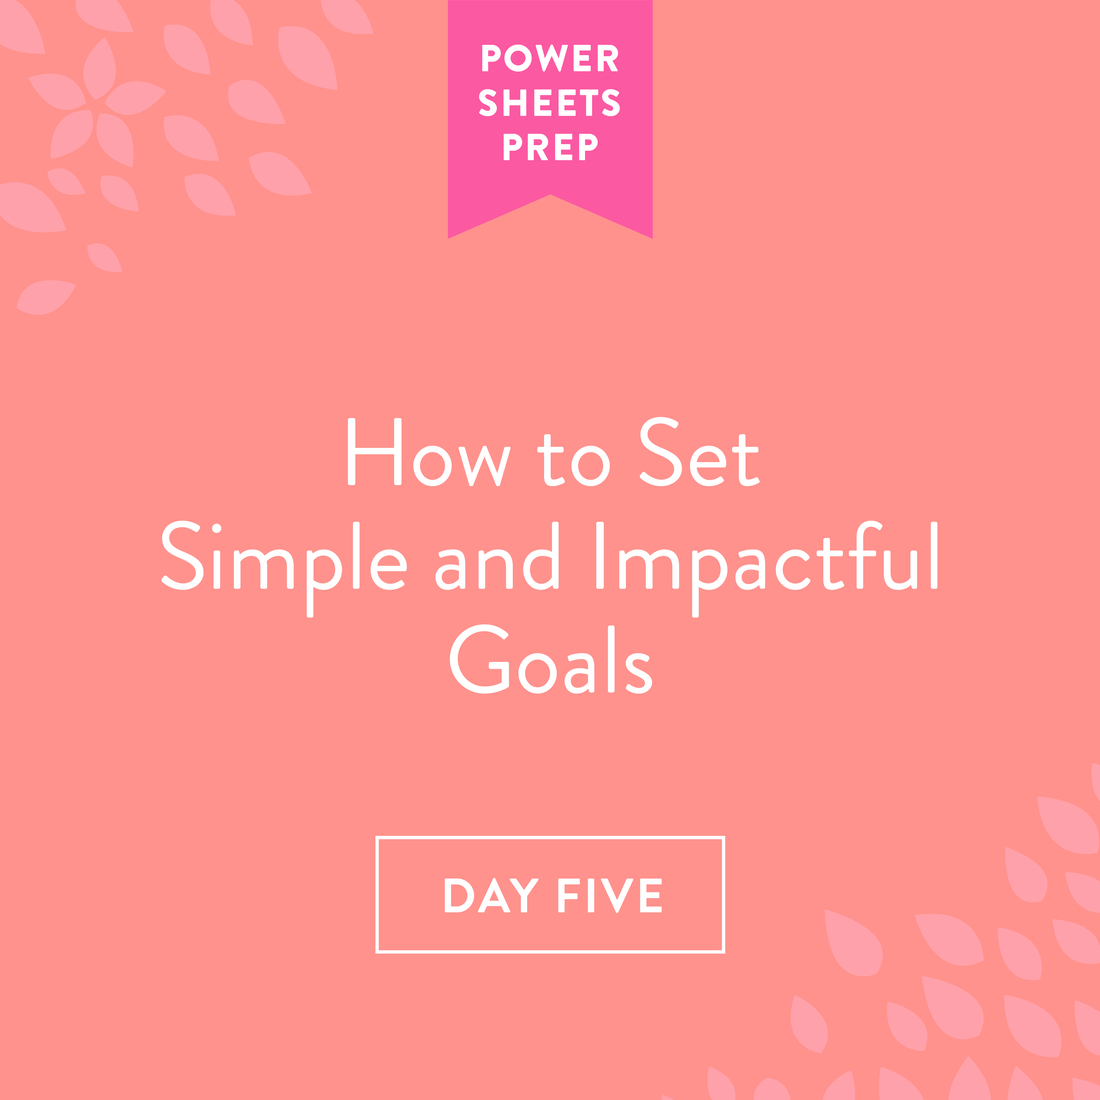 Part Five: How to Set Simple and Impactful Goals